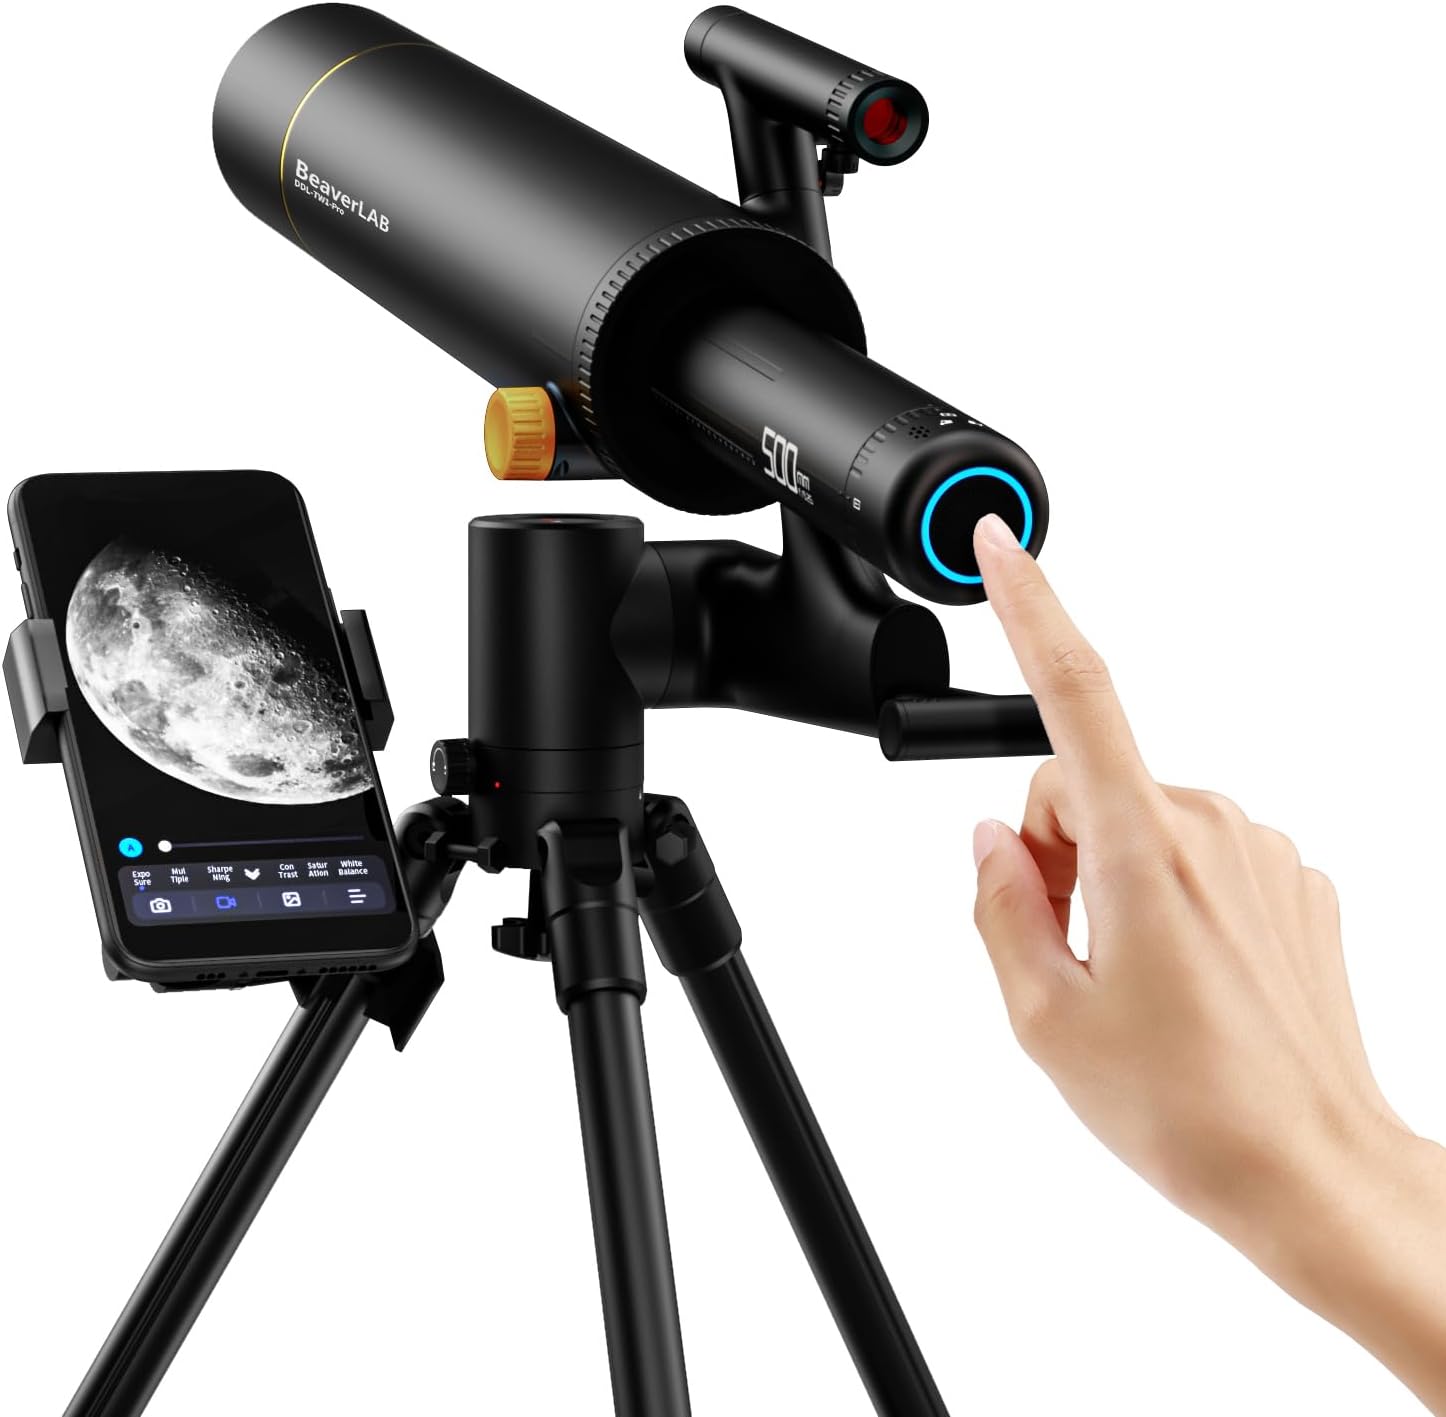 BEAVERLAB TW1 Smart Digital Astronomy Telescope, 500mm Long Focal Length, Compact and Portable, HD Video, WiFi Connected, 1600x Magnification, with APP for Teens and Adults